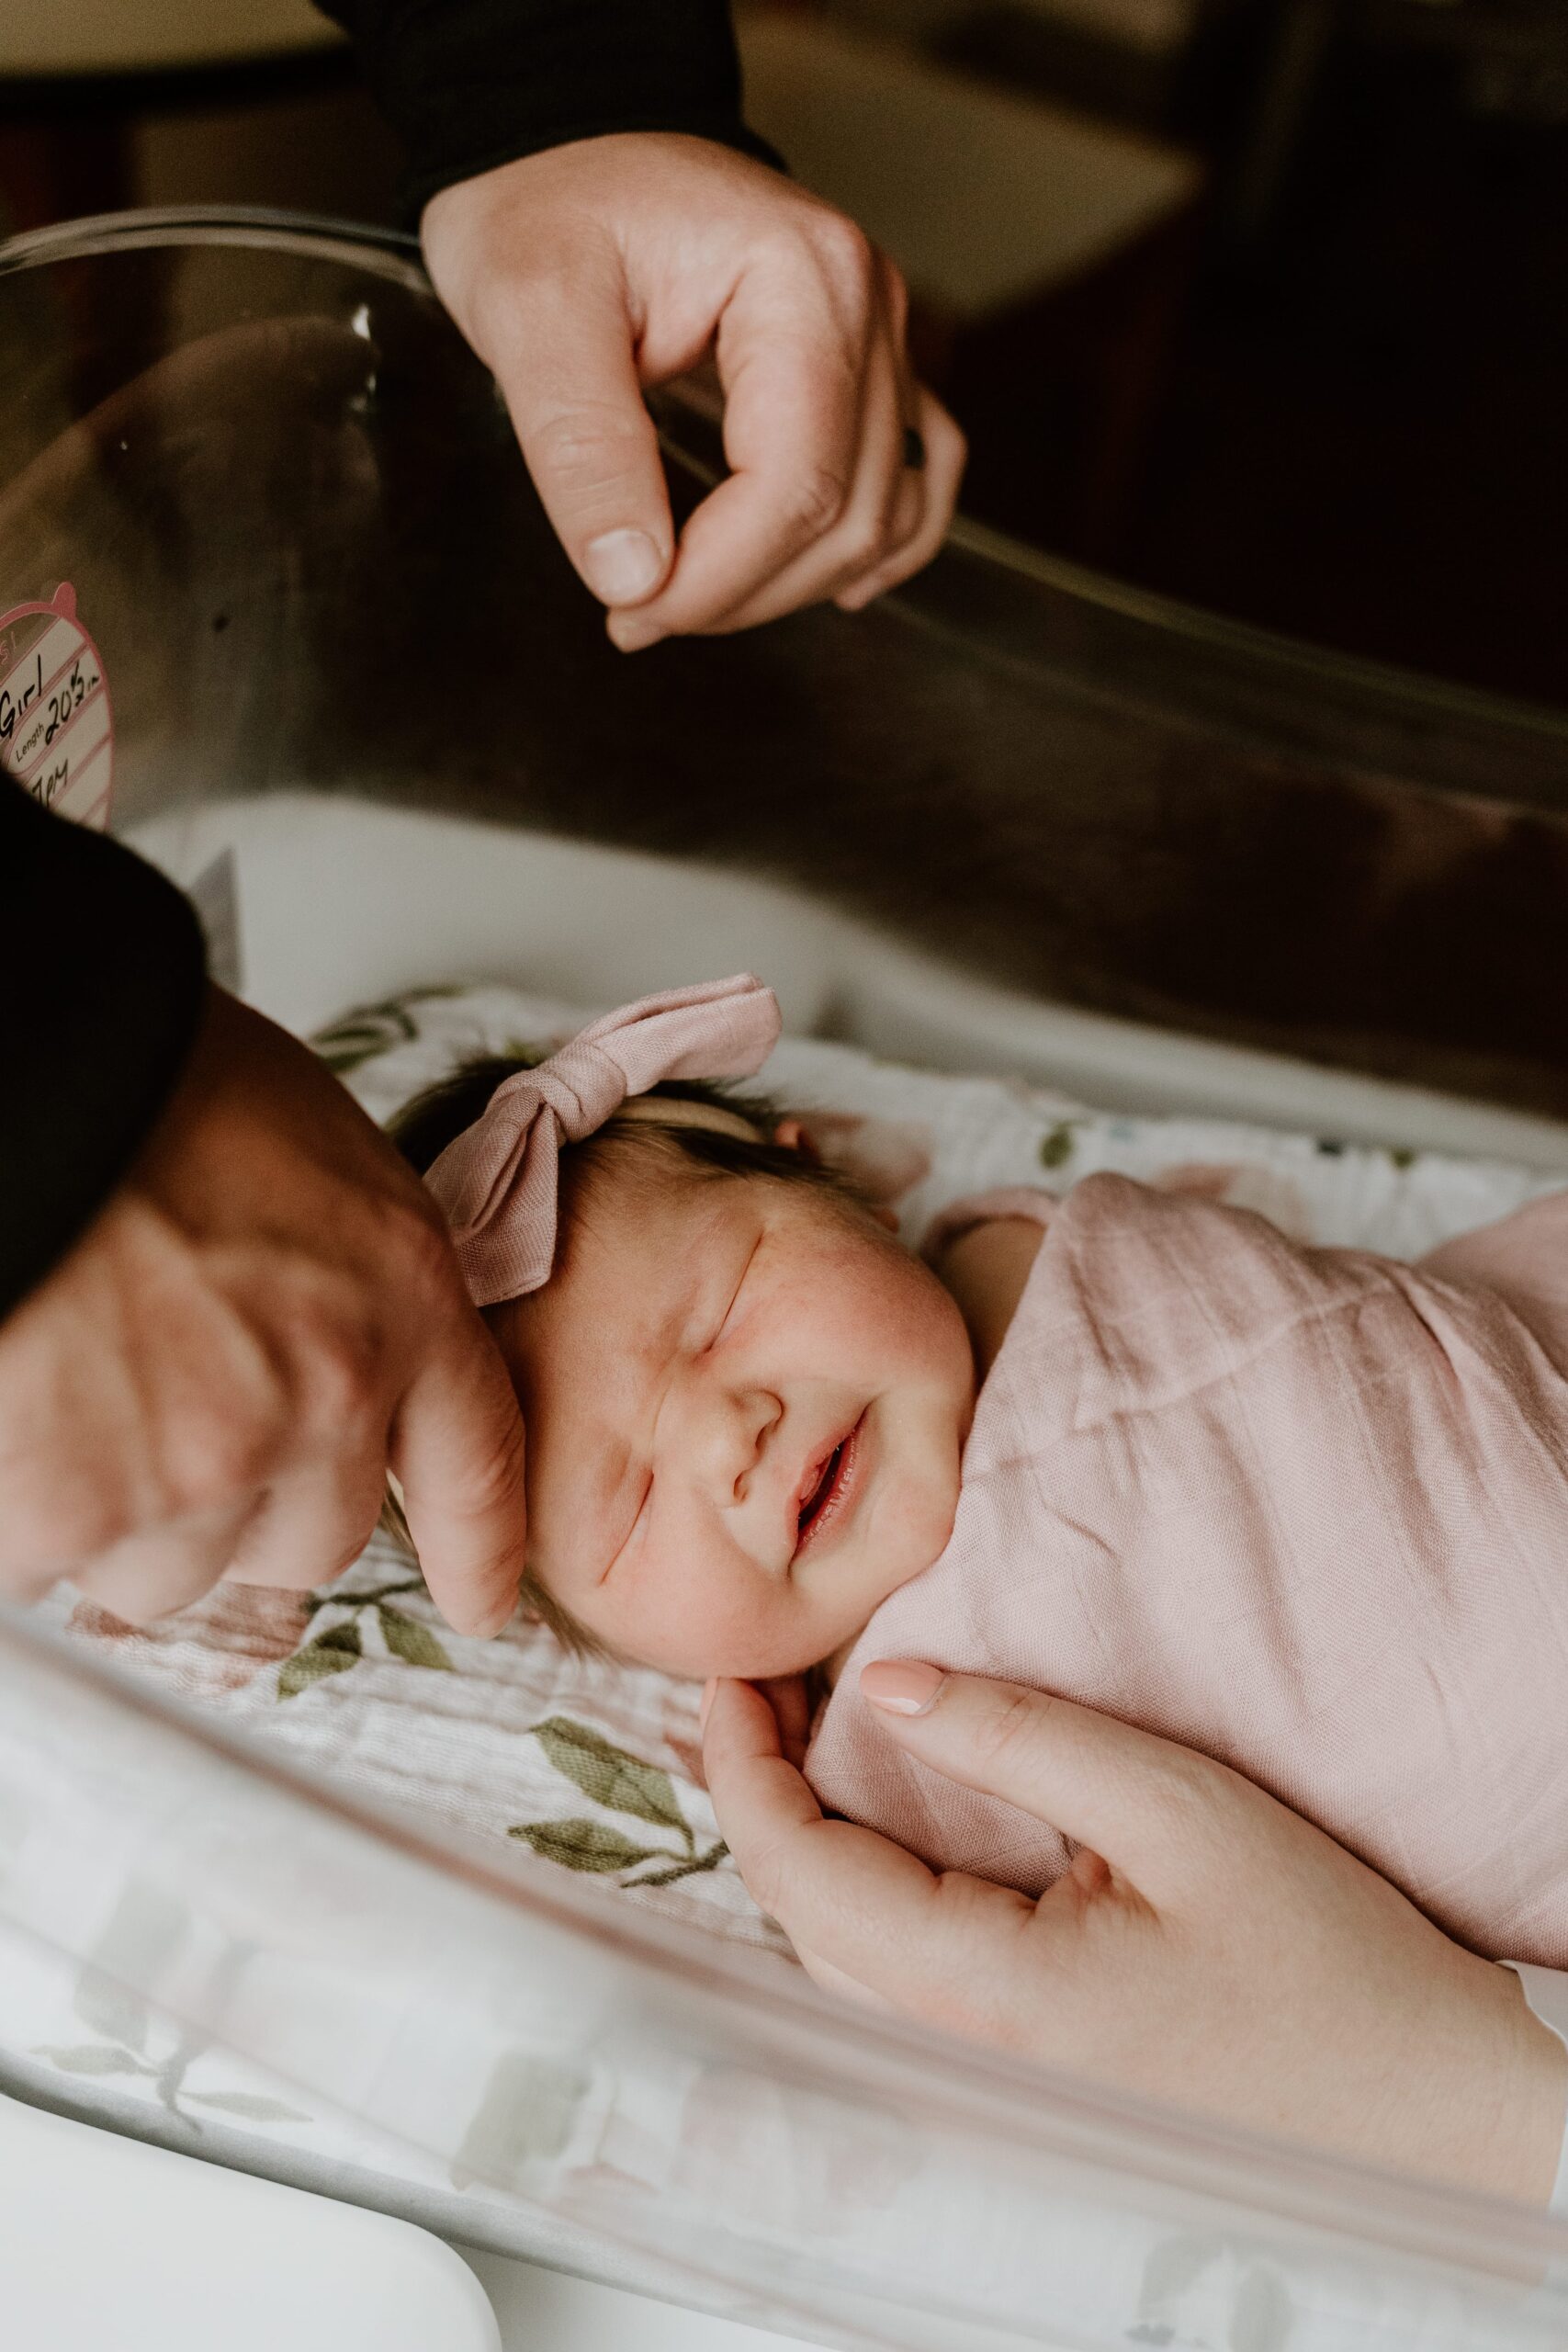 A newborn baby with a delicate pink bow headband is gently cradled in the hands of an adult at Vassar Brothers Medical Center. The baby is swaddled in a soft pink blanket and is peacefully asleep, showing a serene expression.